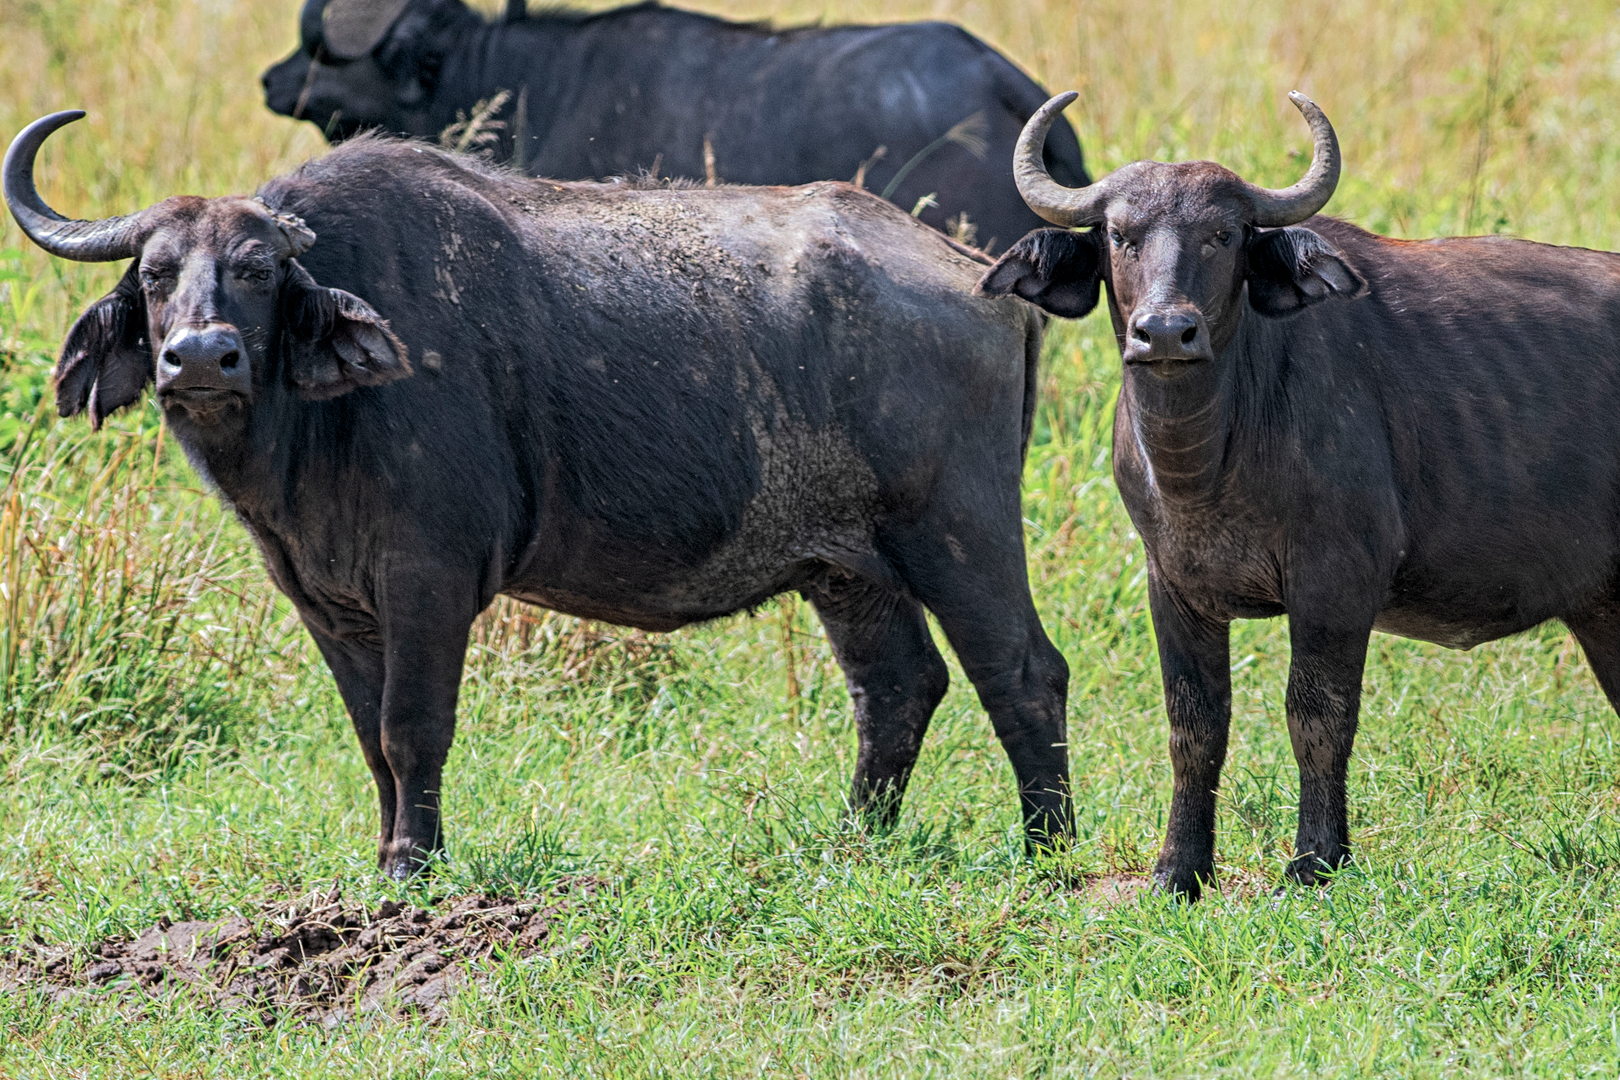 Buffaloes are some of the mammals to enjoy